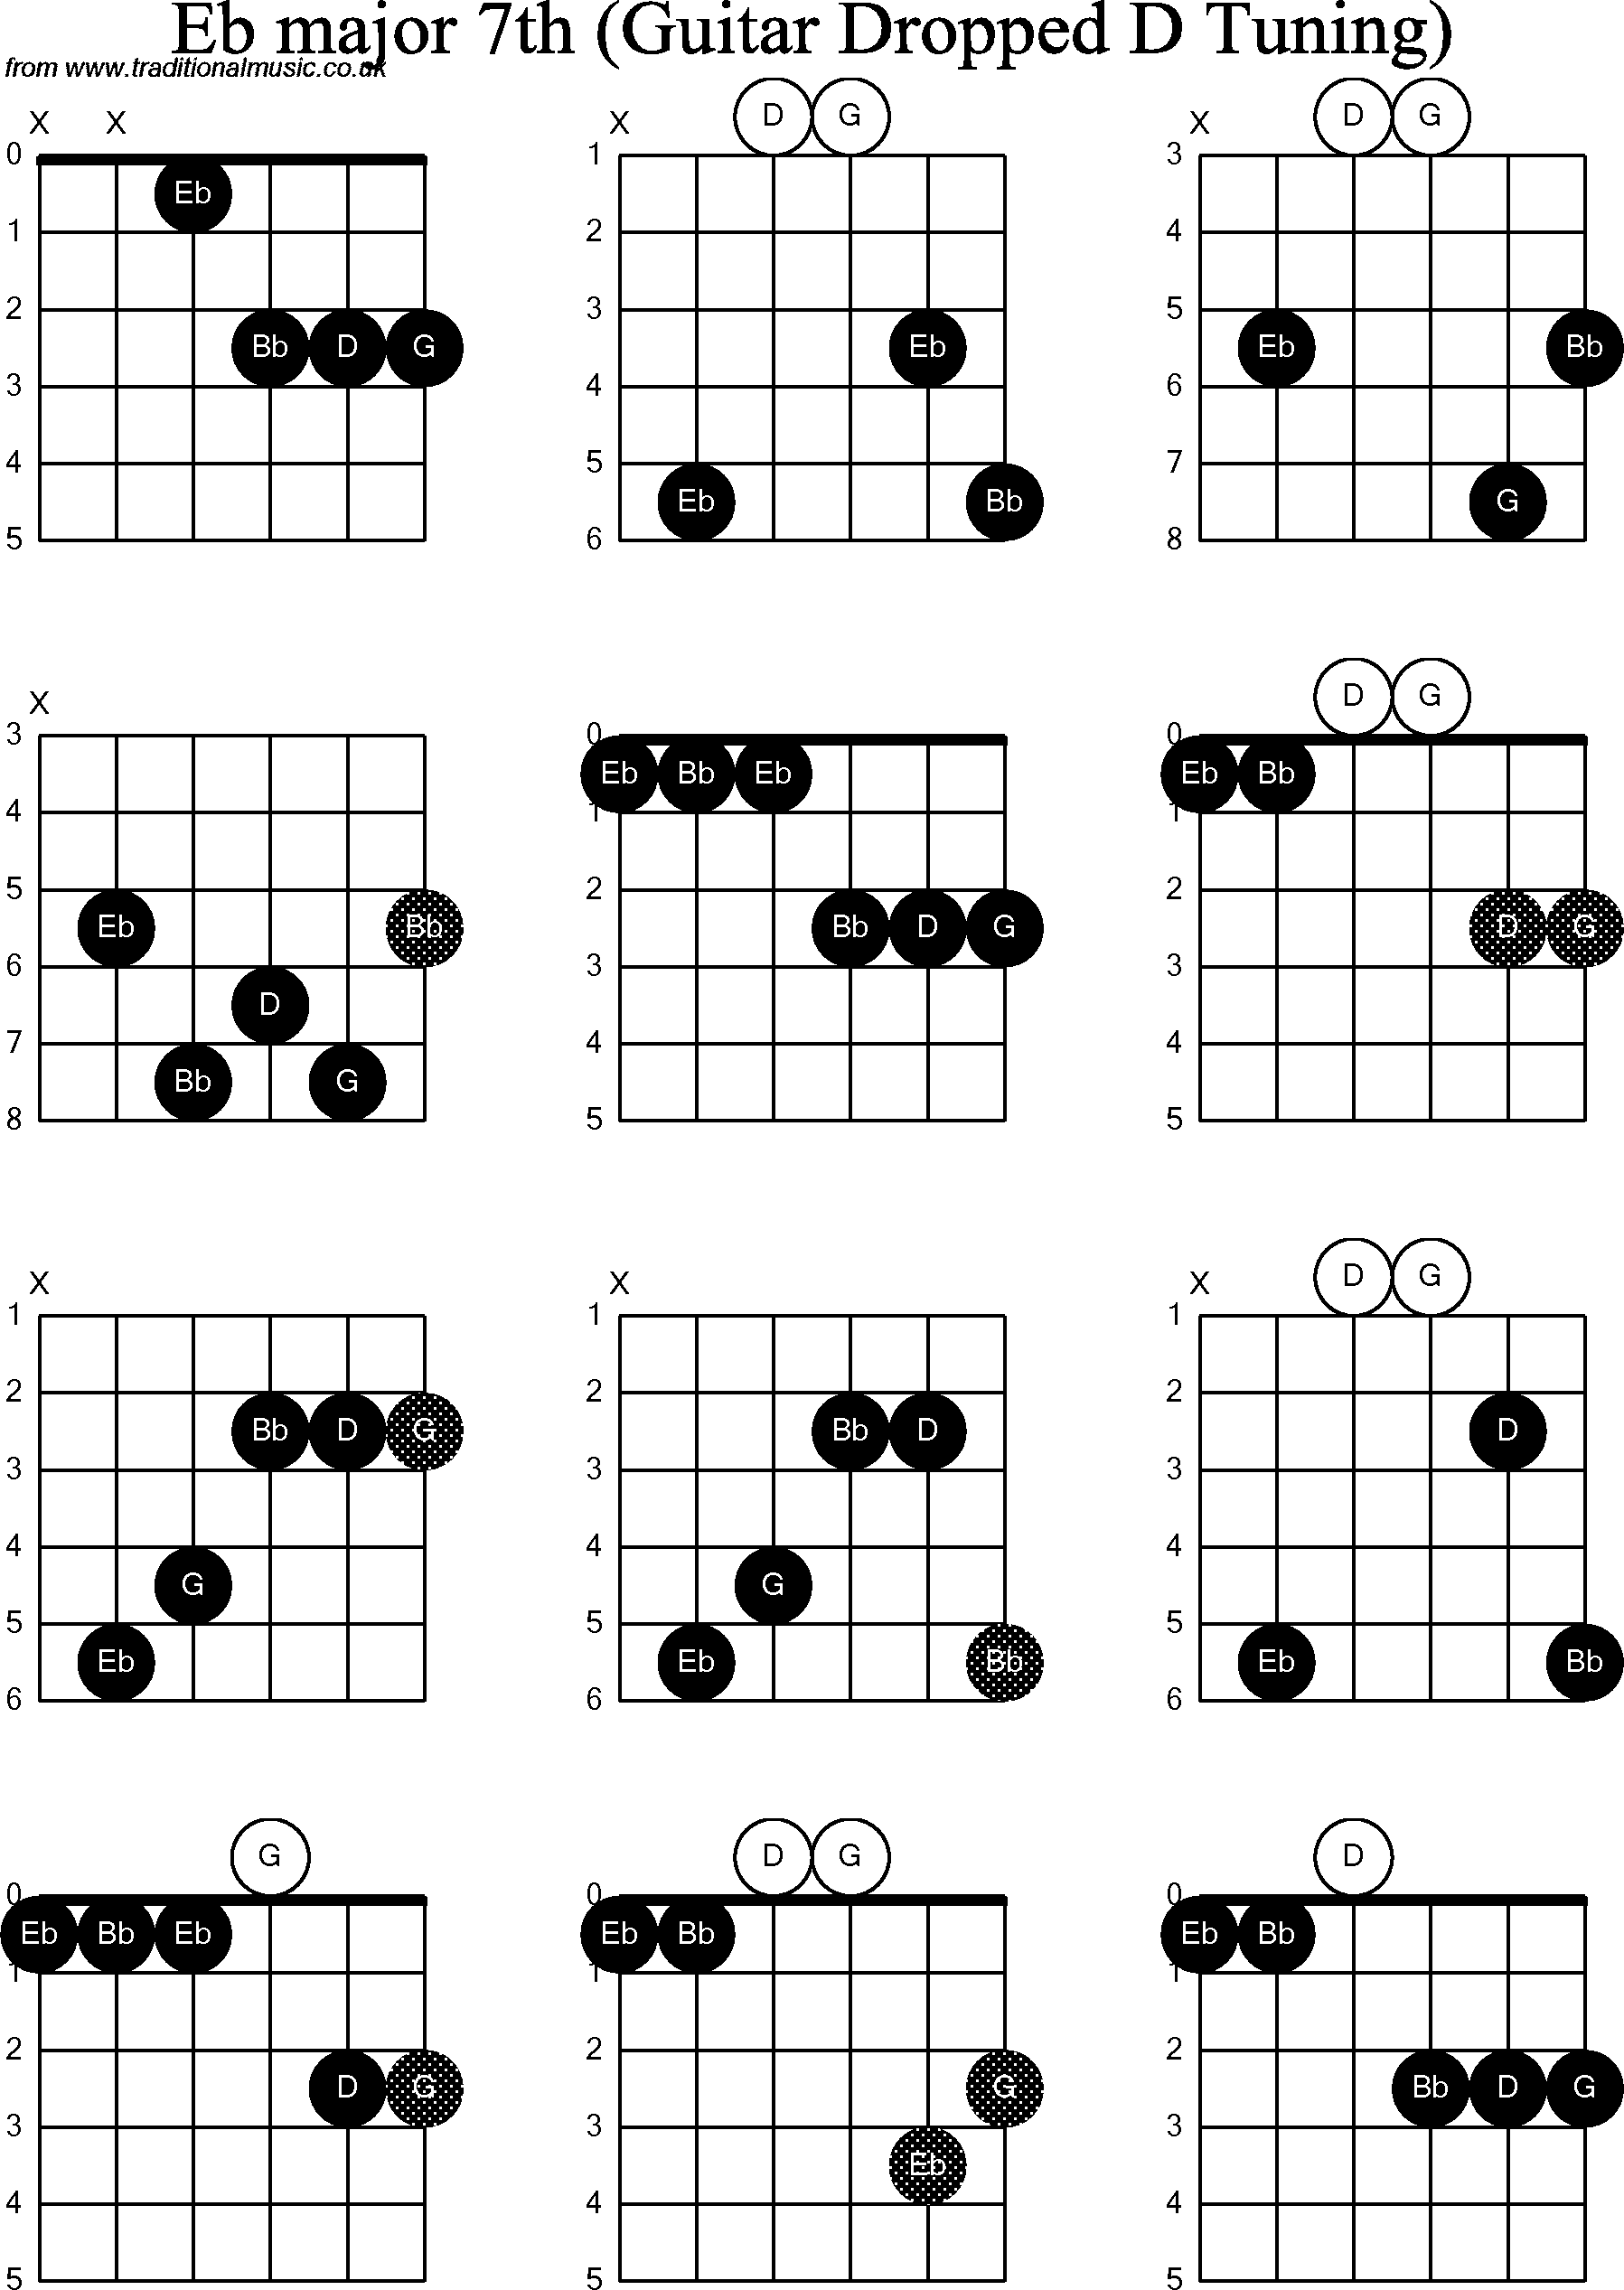 Chord diagrams for Dropped D Guitar(DADGBE), C Sharp Major7th